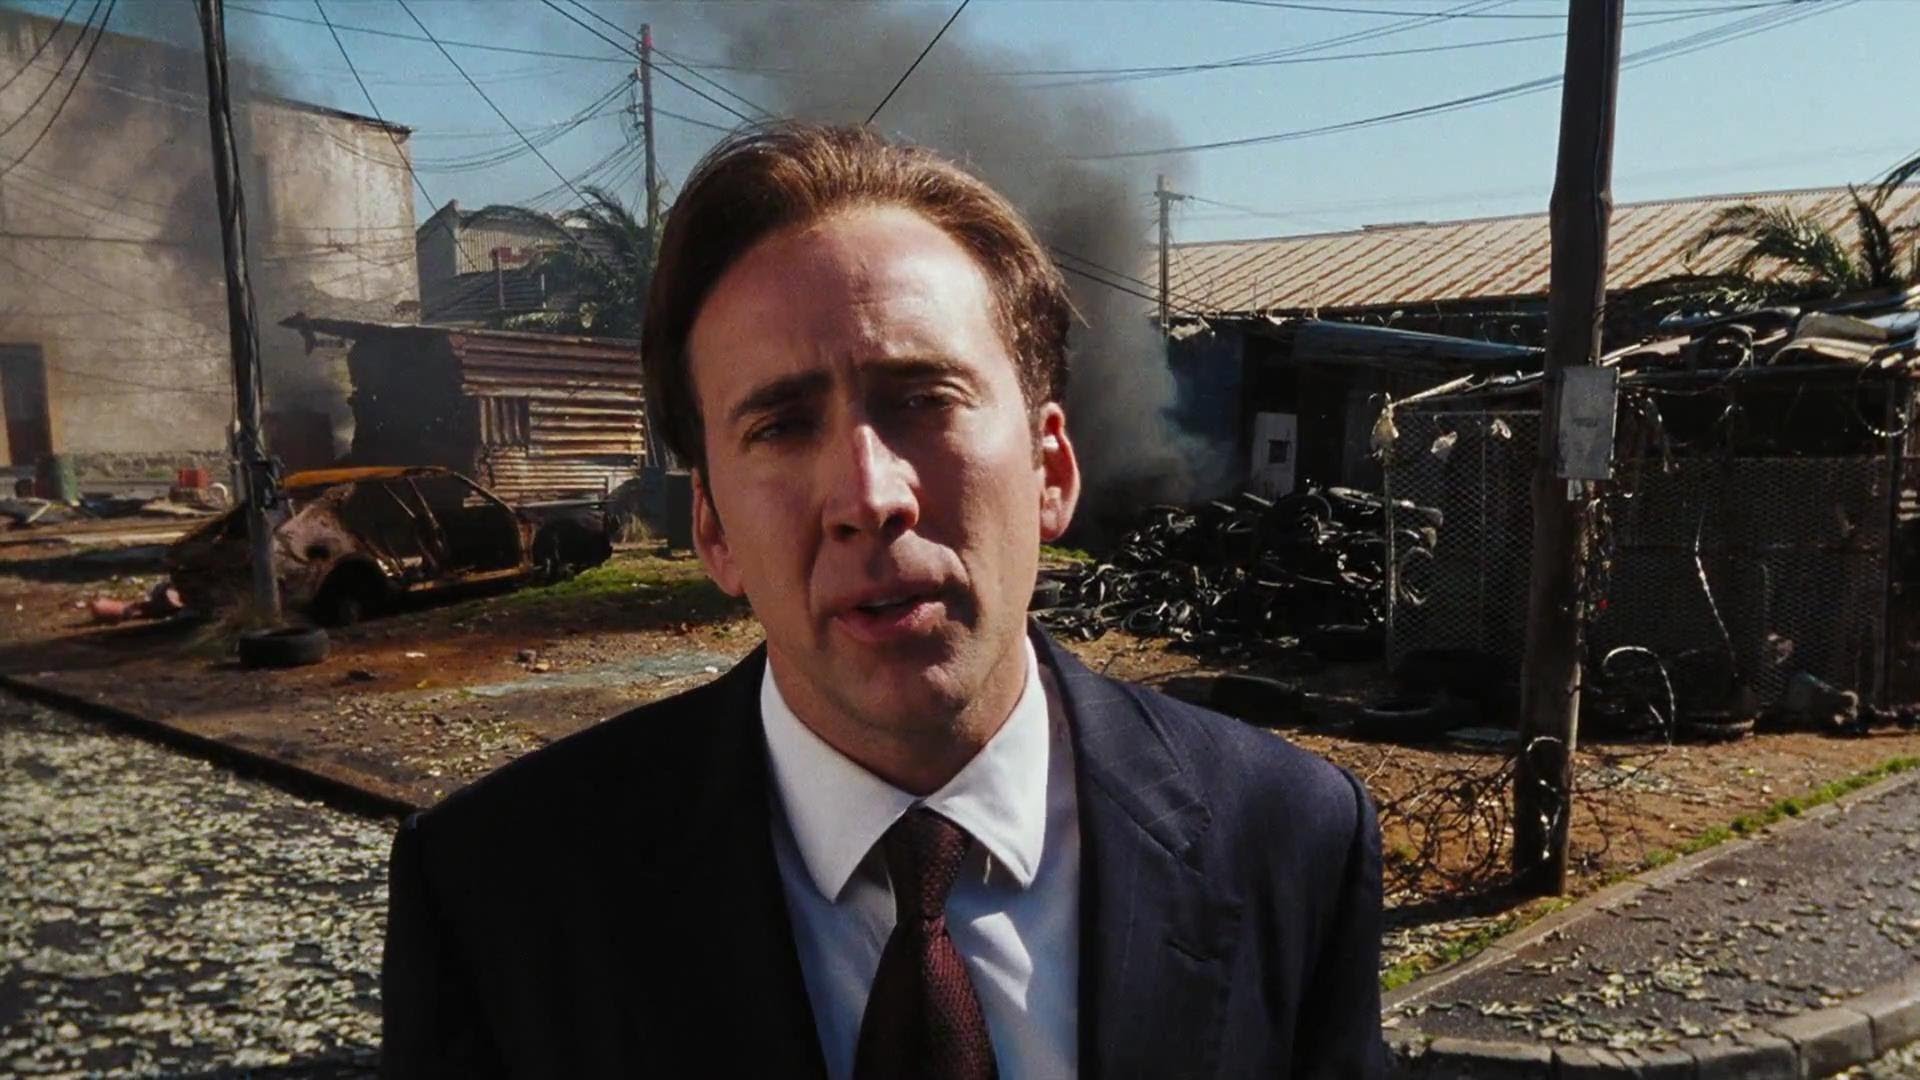 Lord Of War Pics, Movie Collection